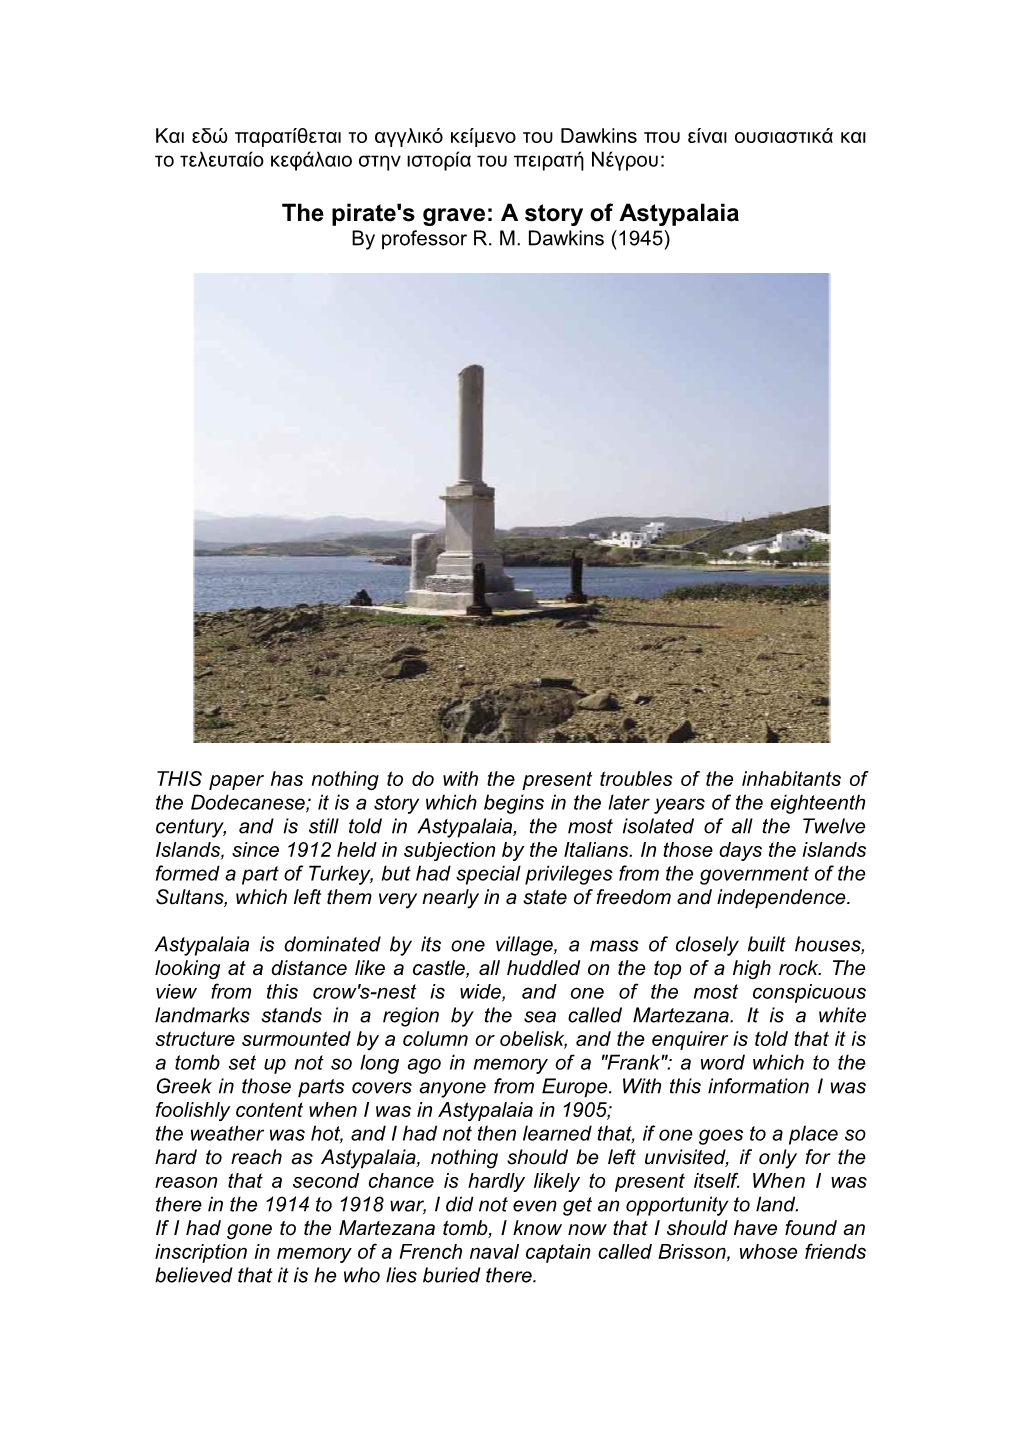 The Pirate's Grave: a Story of Astypalaia by Professor R